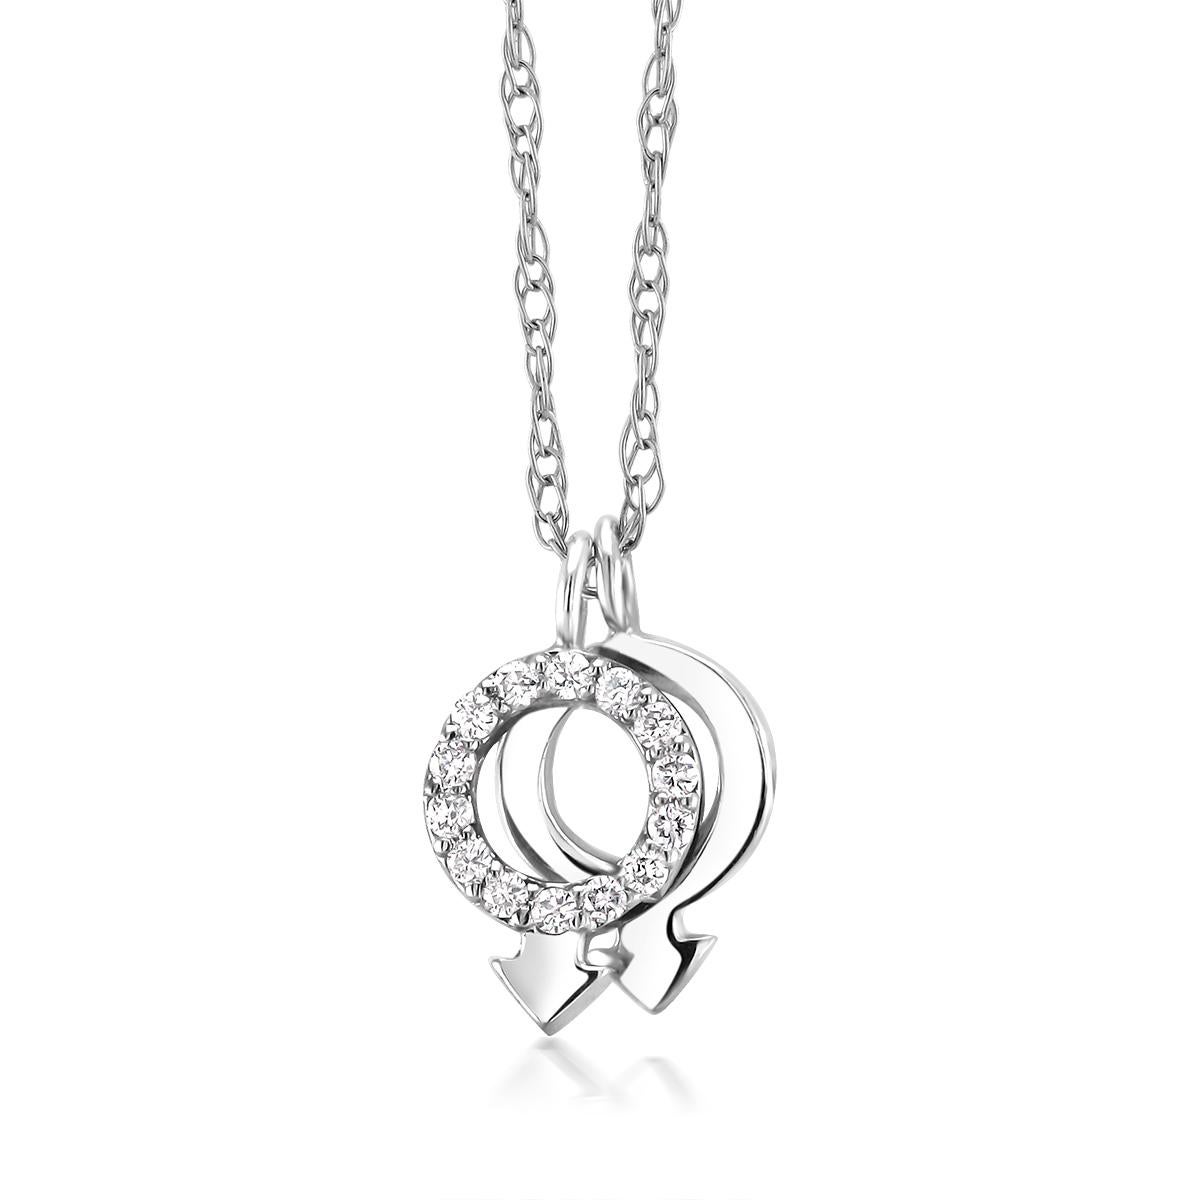 Contemporary White Gold Gender Shape Two Charms Diamond Pendant Necklace